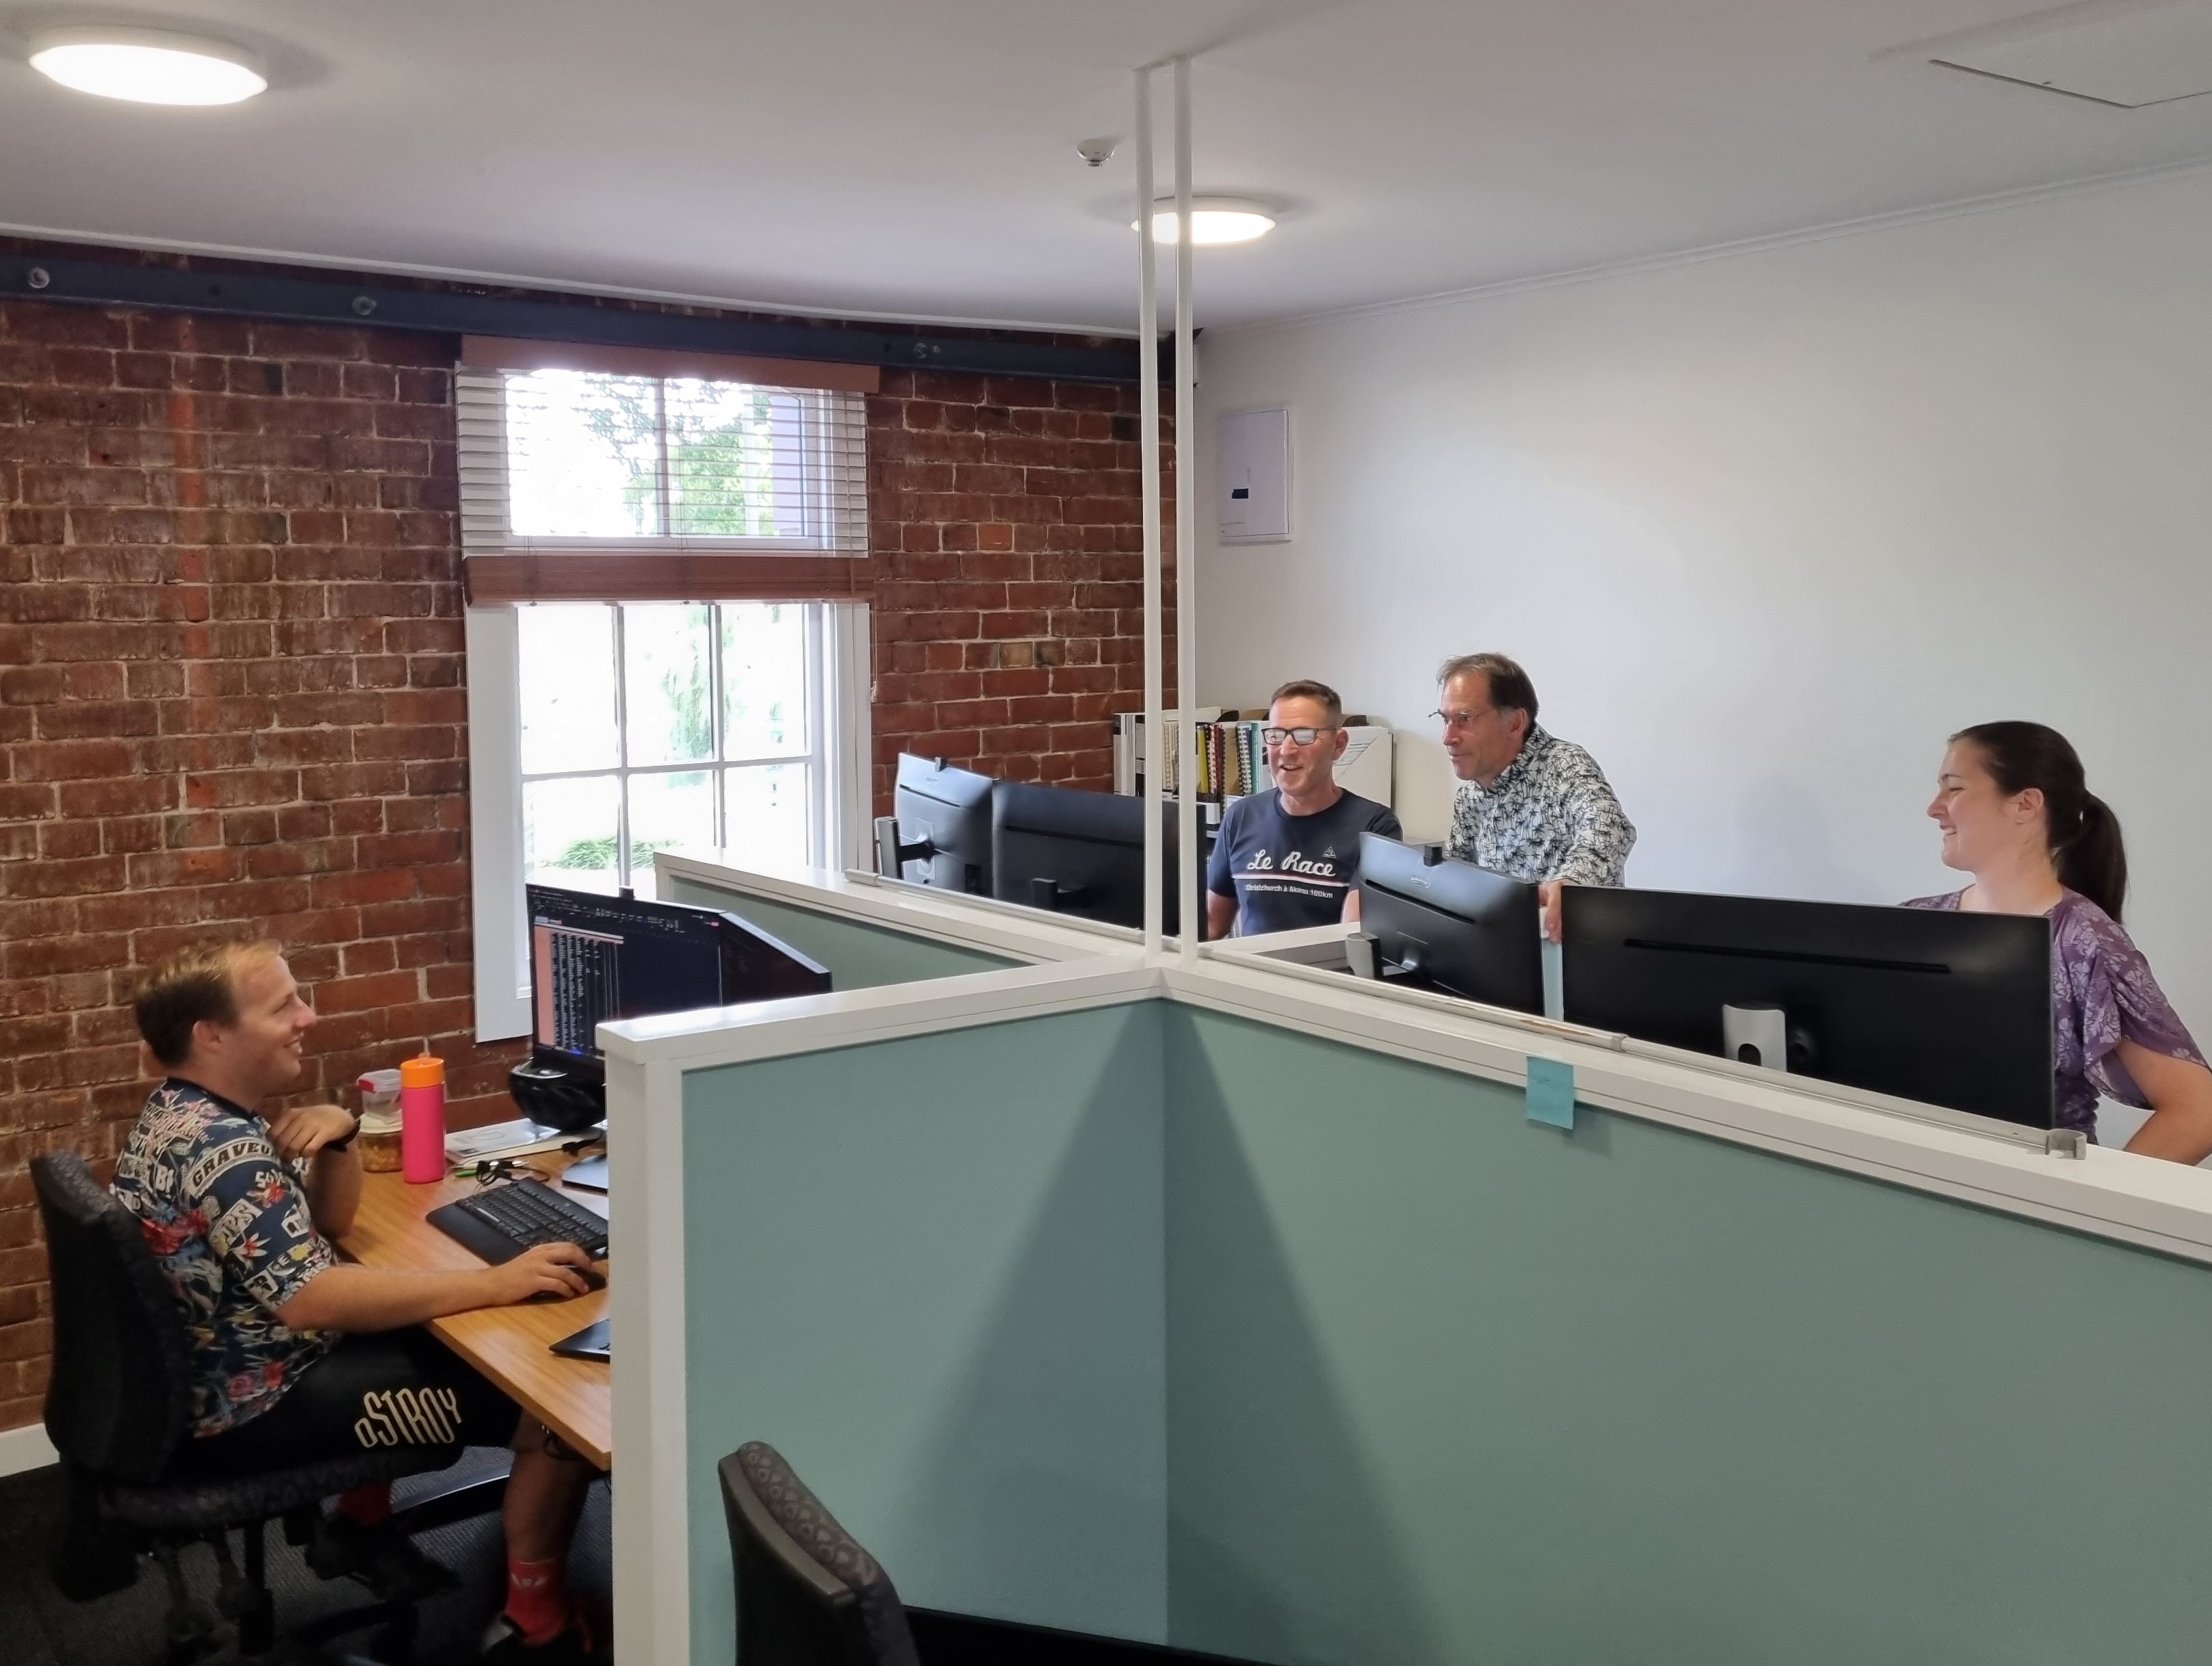 John, Warren, David and Megan all working in the new office space